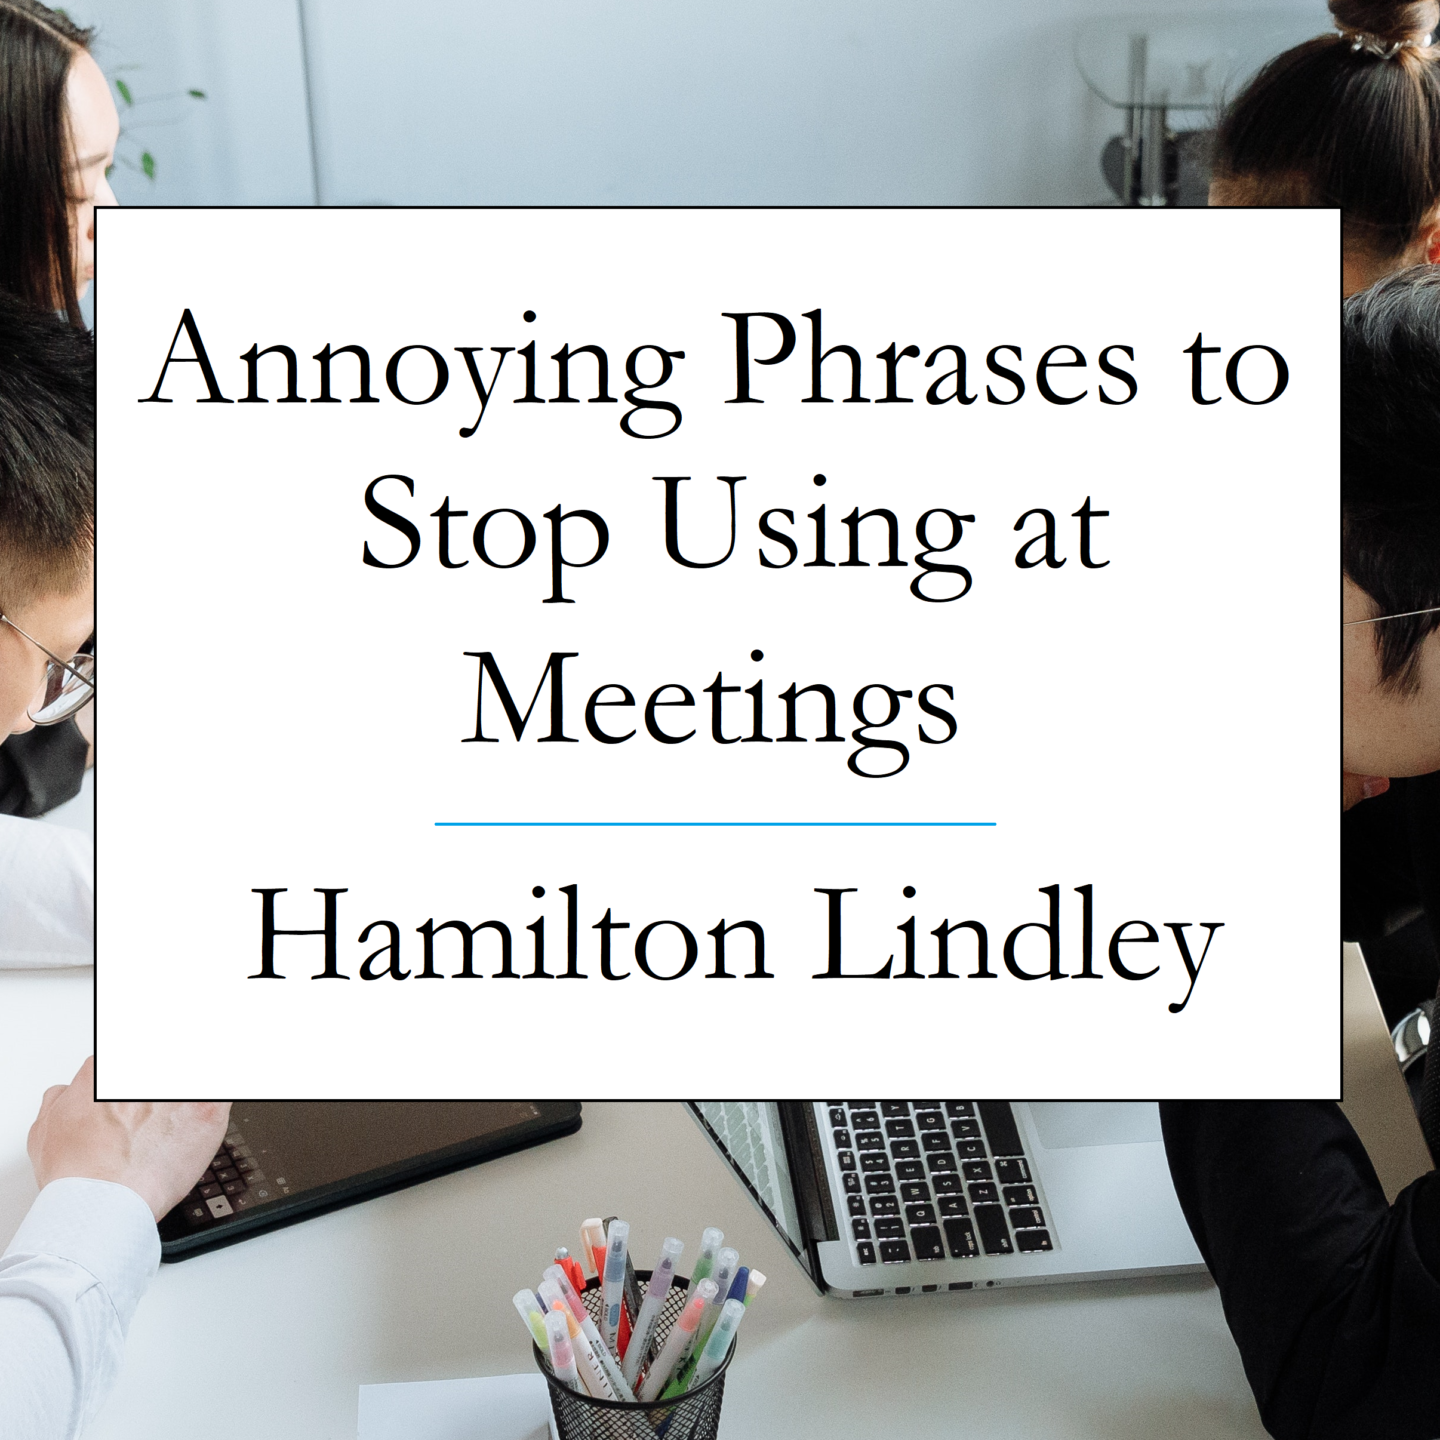 Annoying Phrases to Stop Using at Meetings